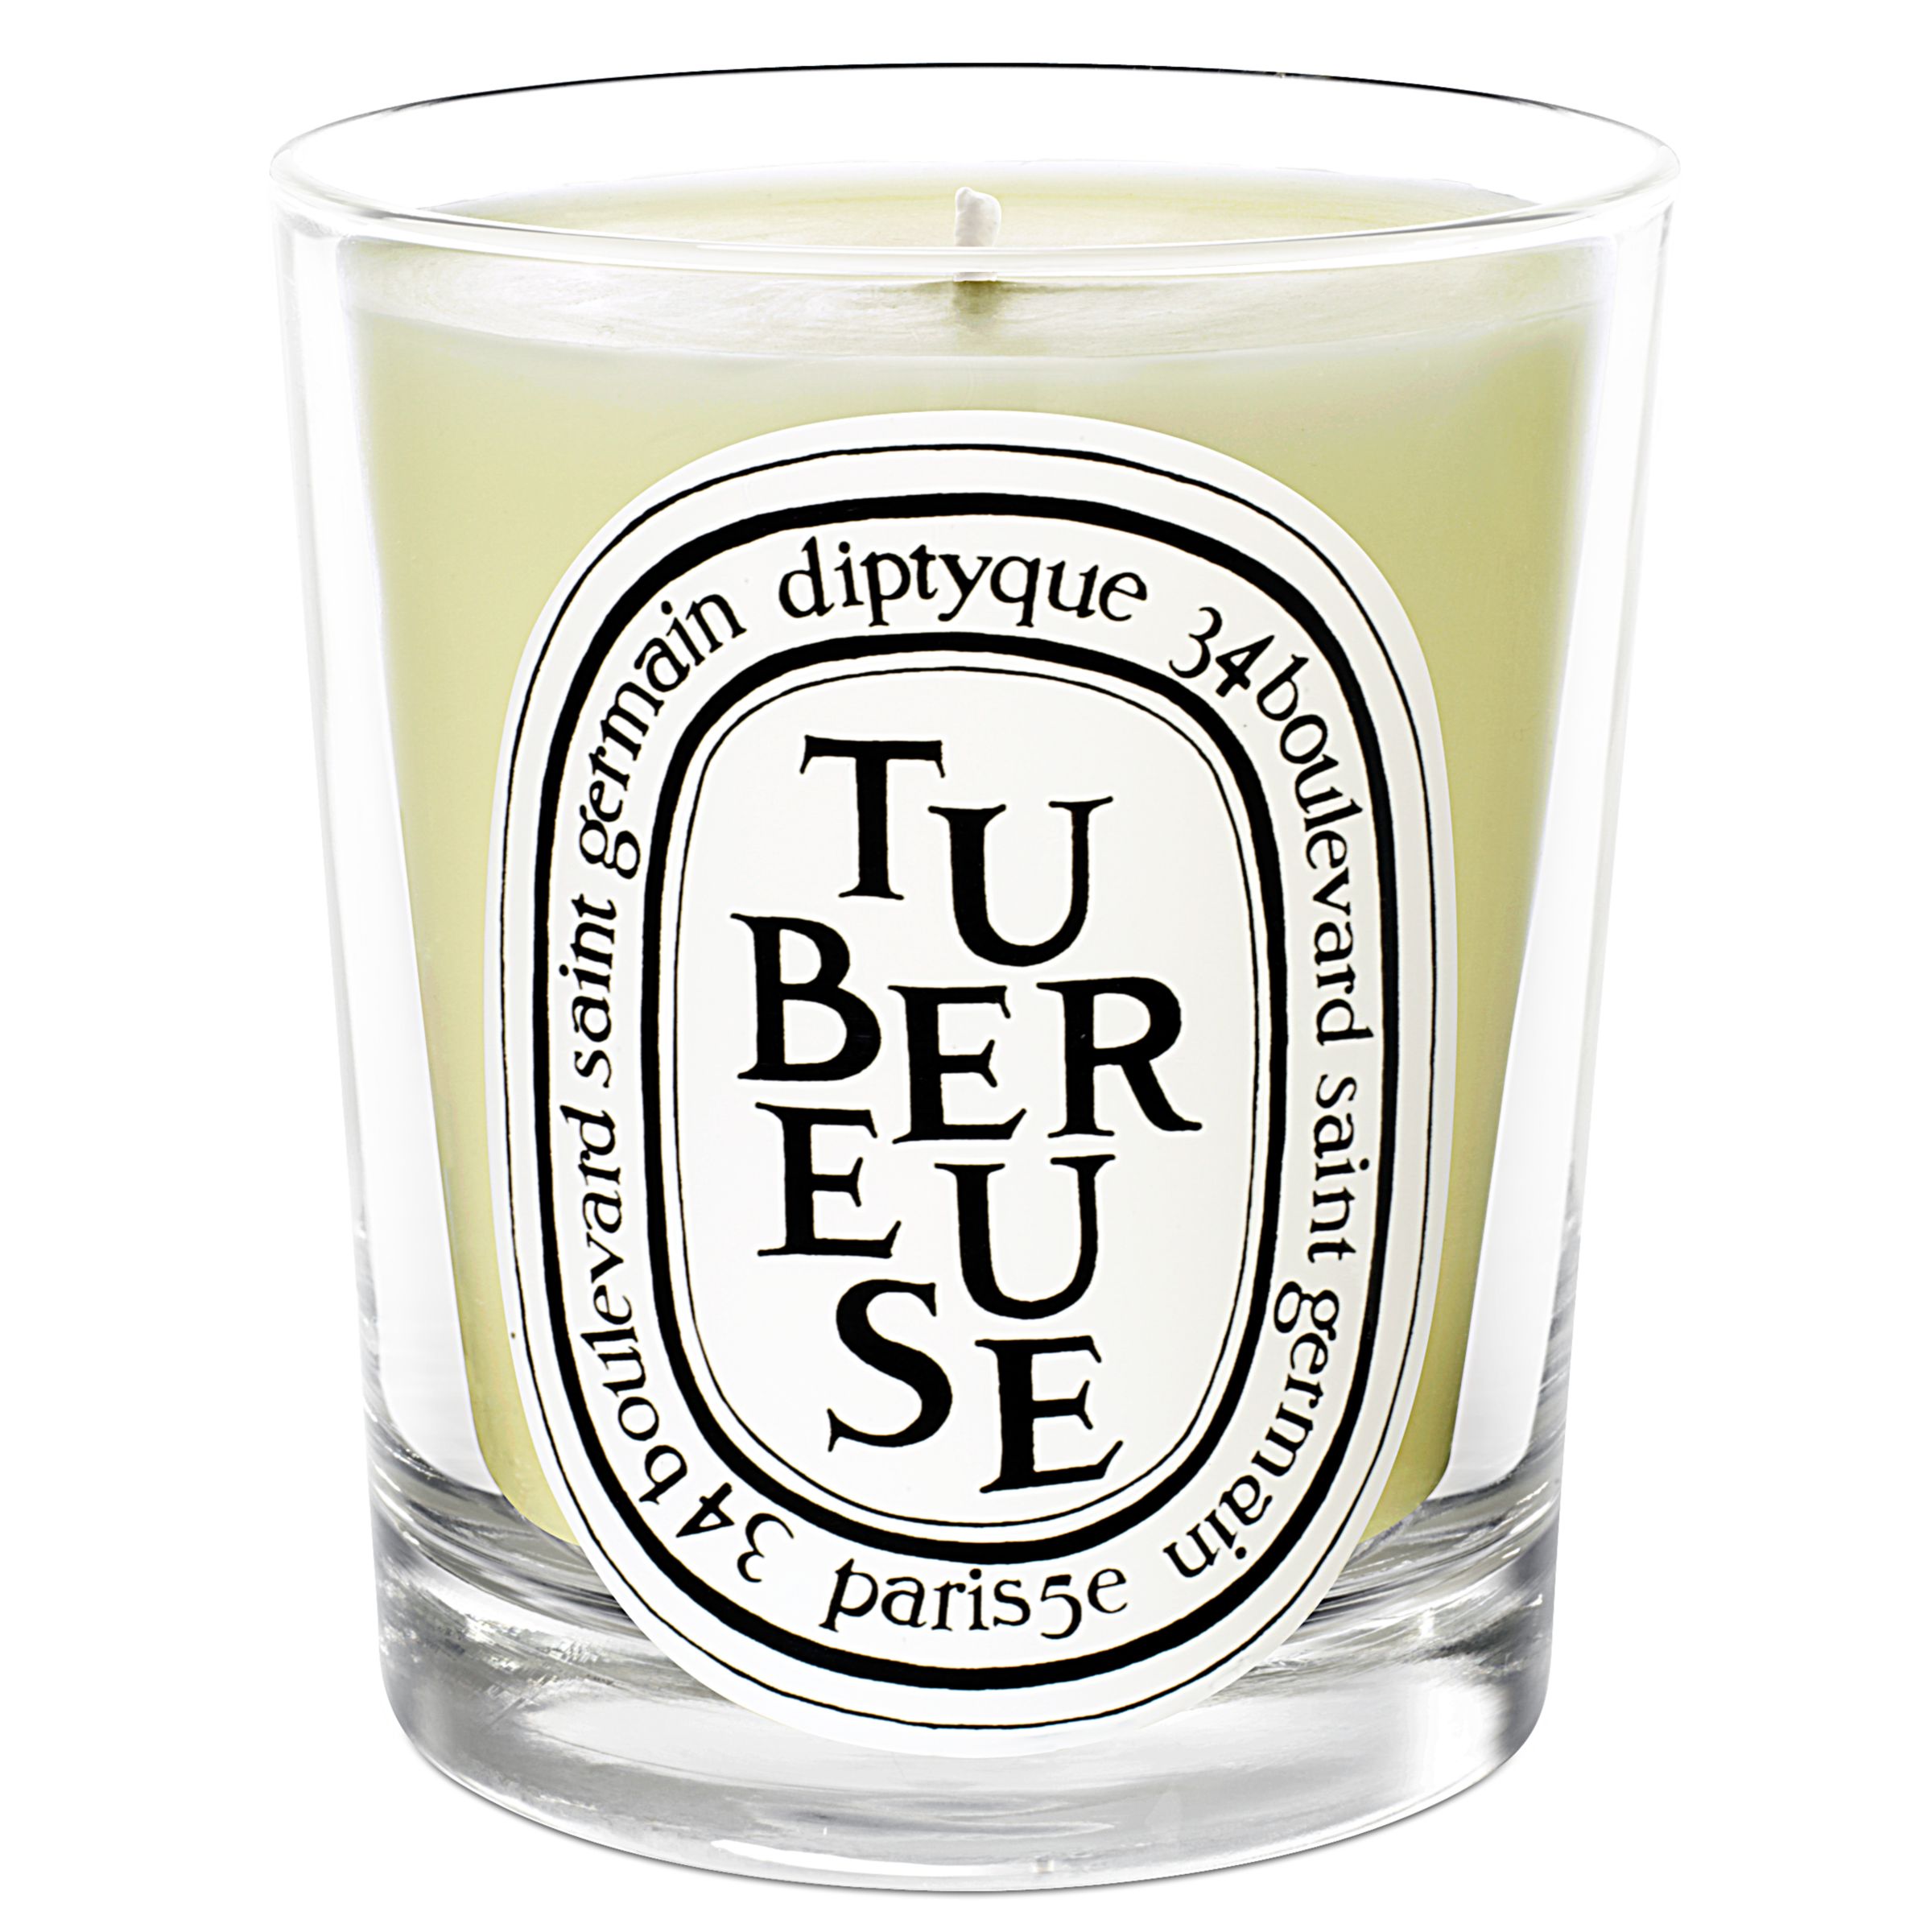 Diptyque Tubereuse Scented Candle, 190g 230557275